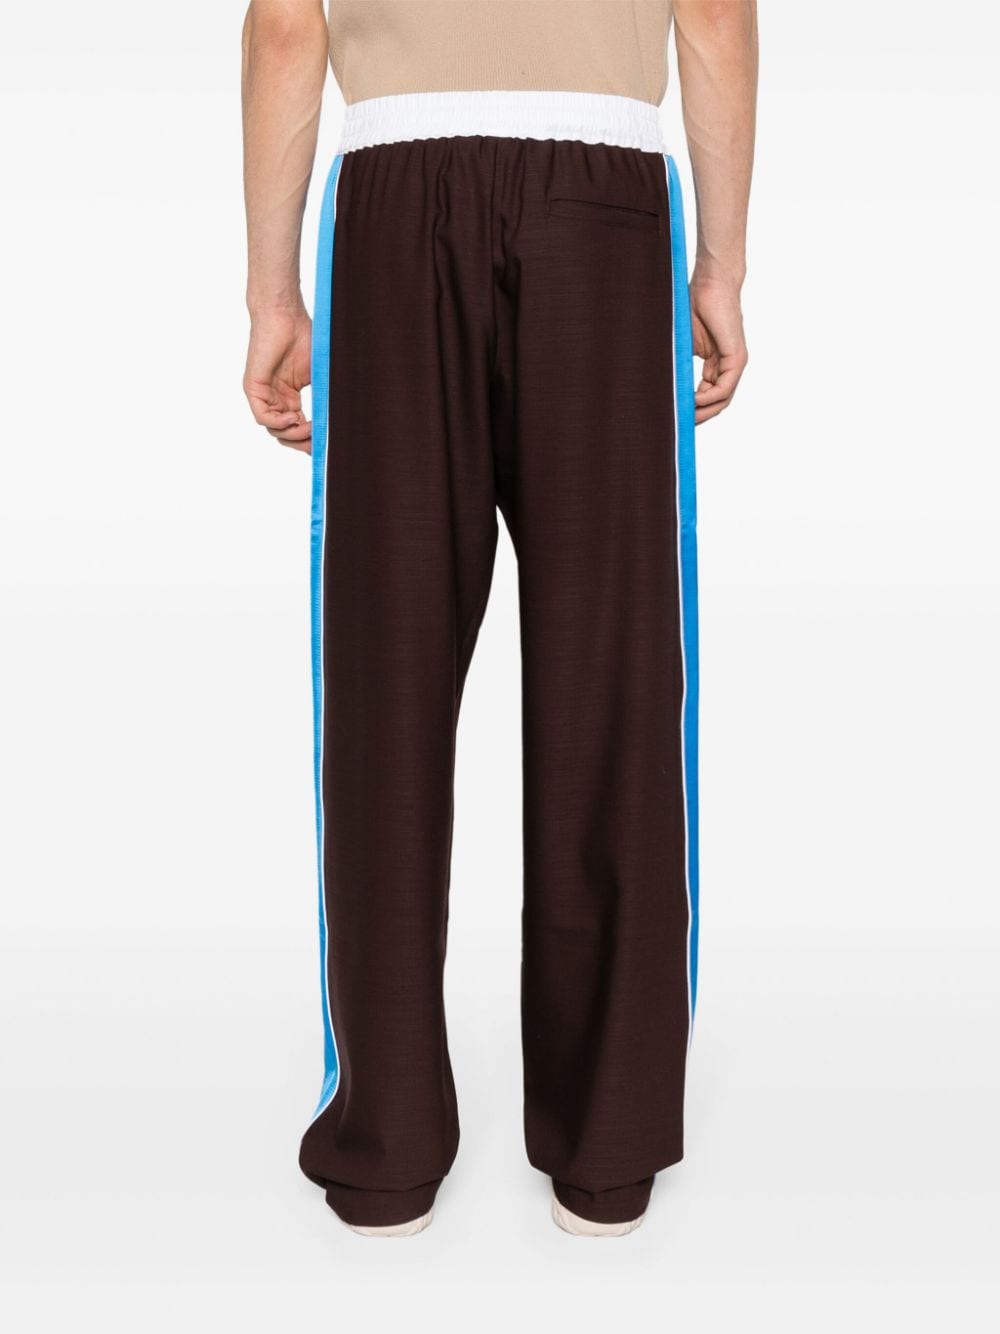 Wales Bonner Trousers Brown